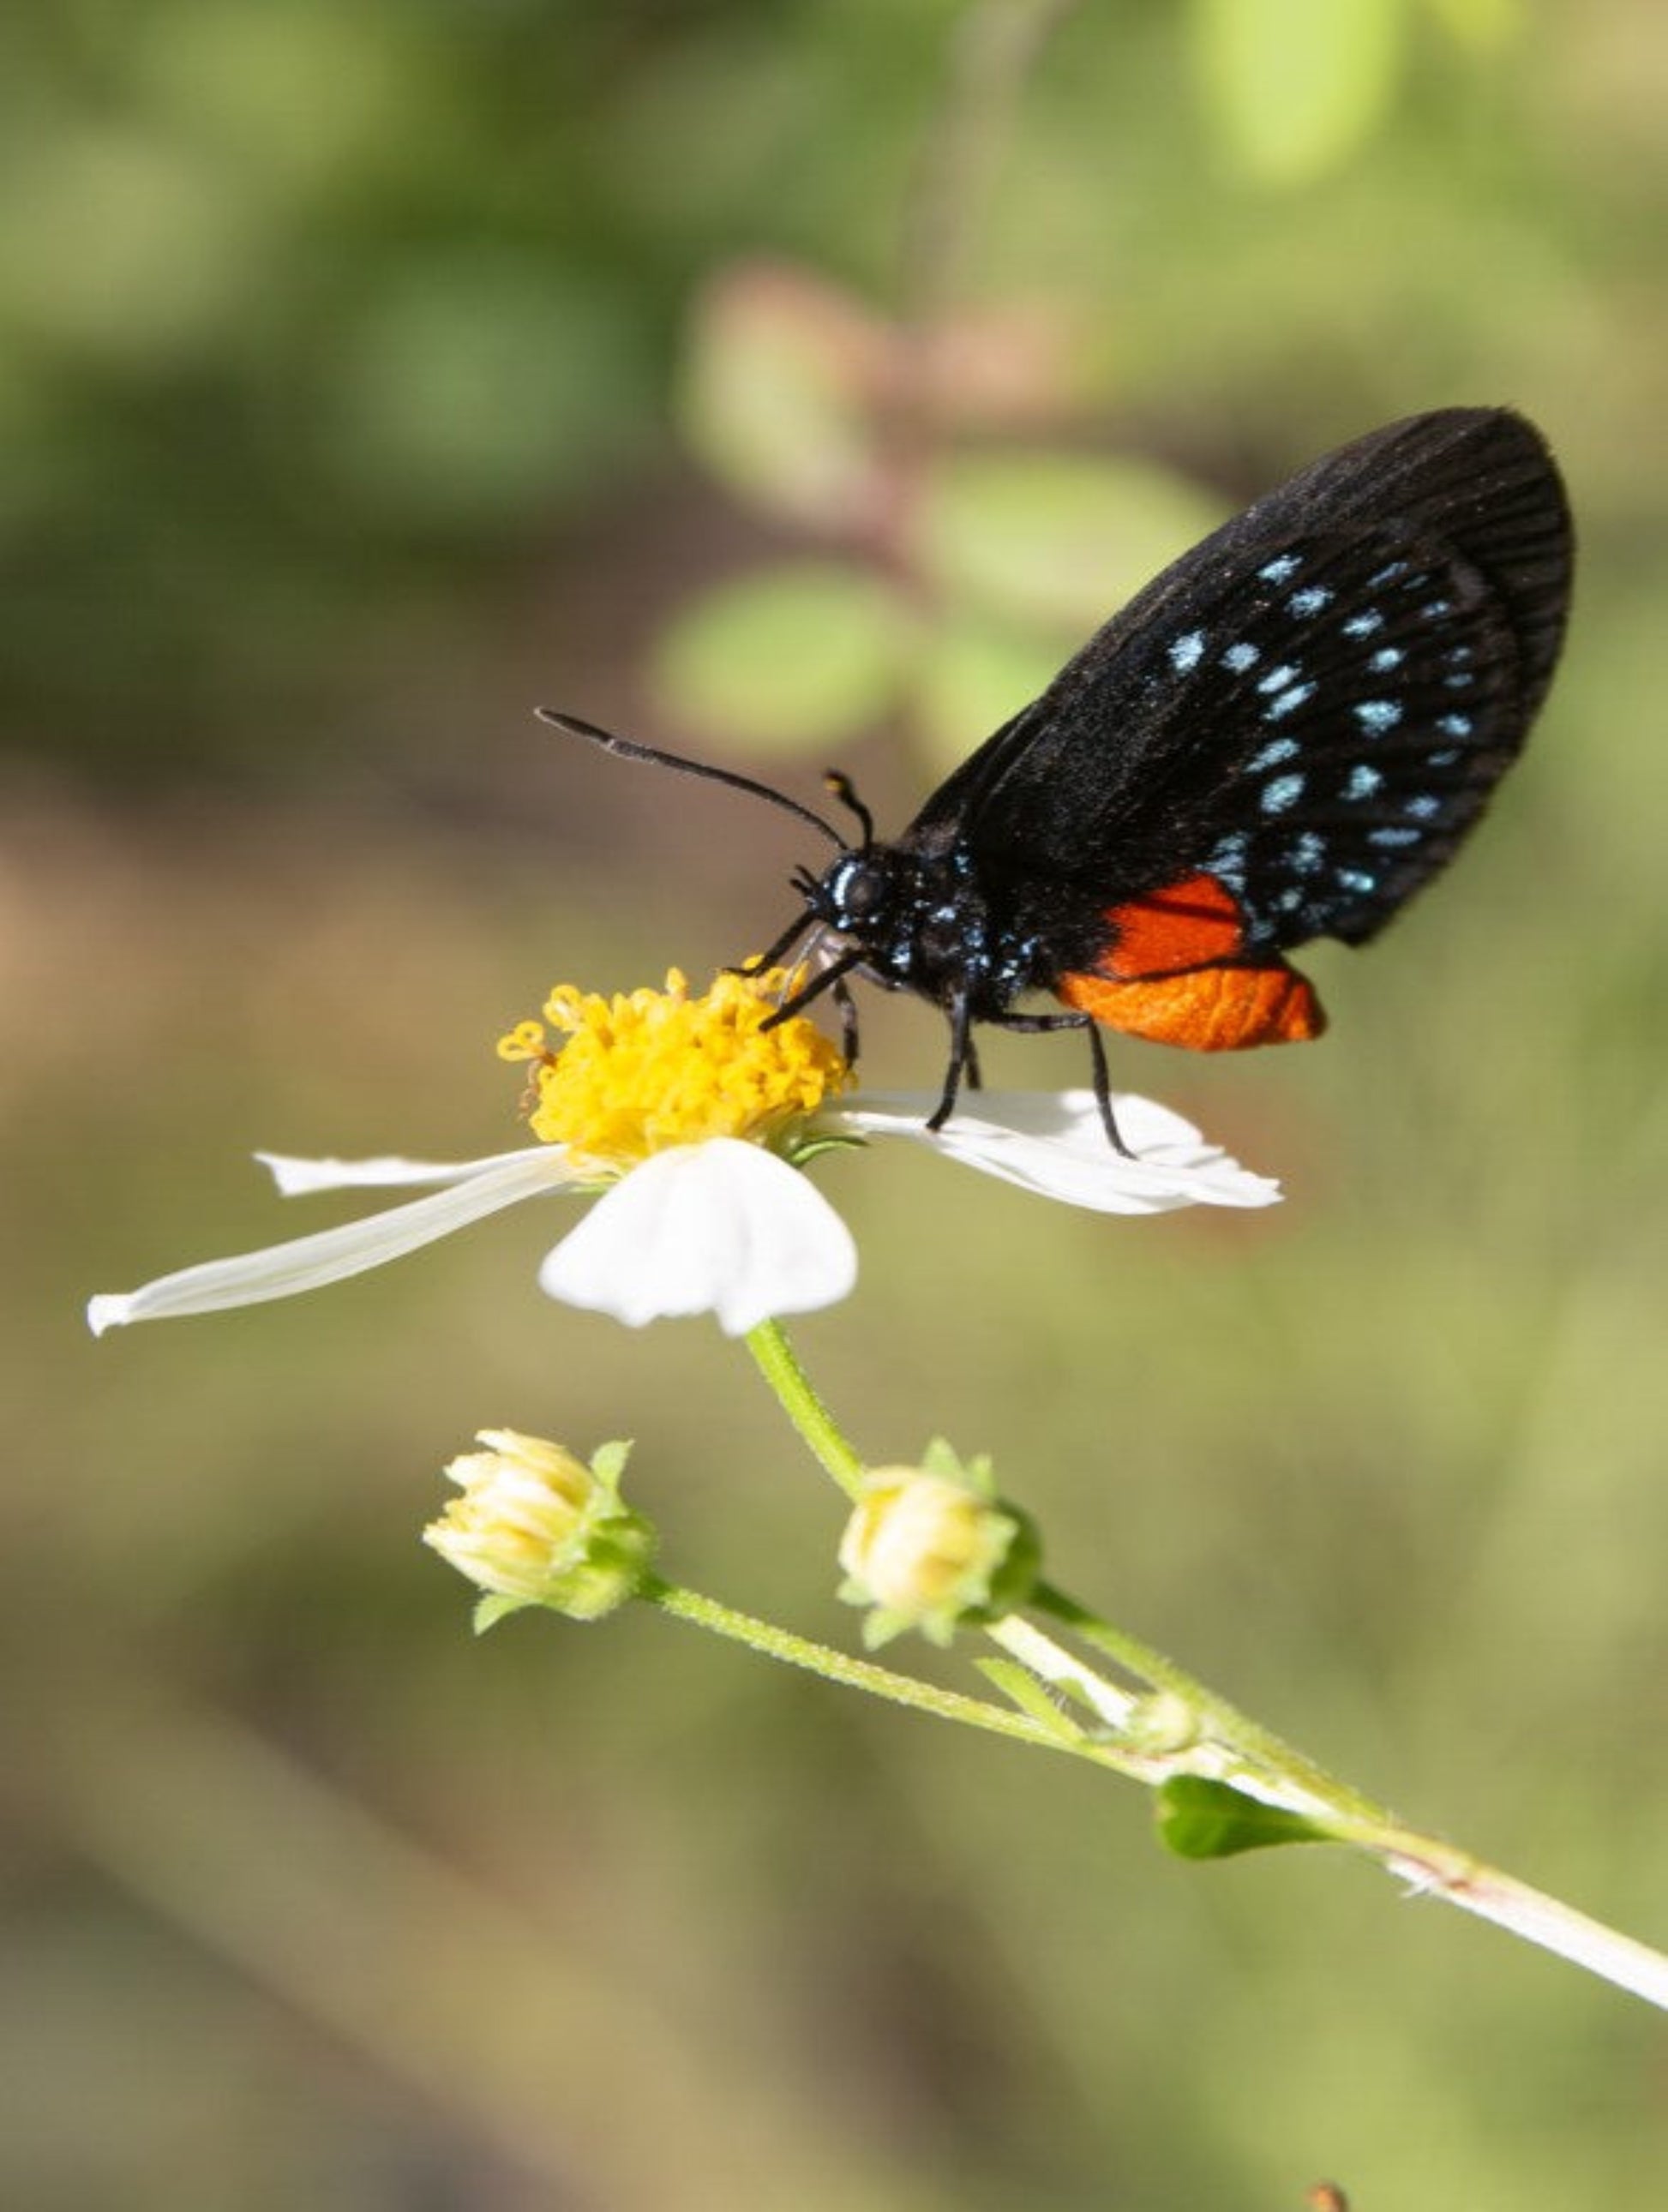 atala butterfly uses the coontie plant as host plant